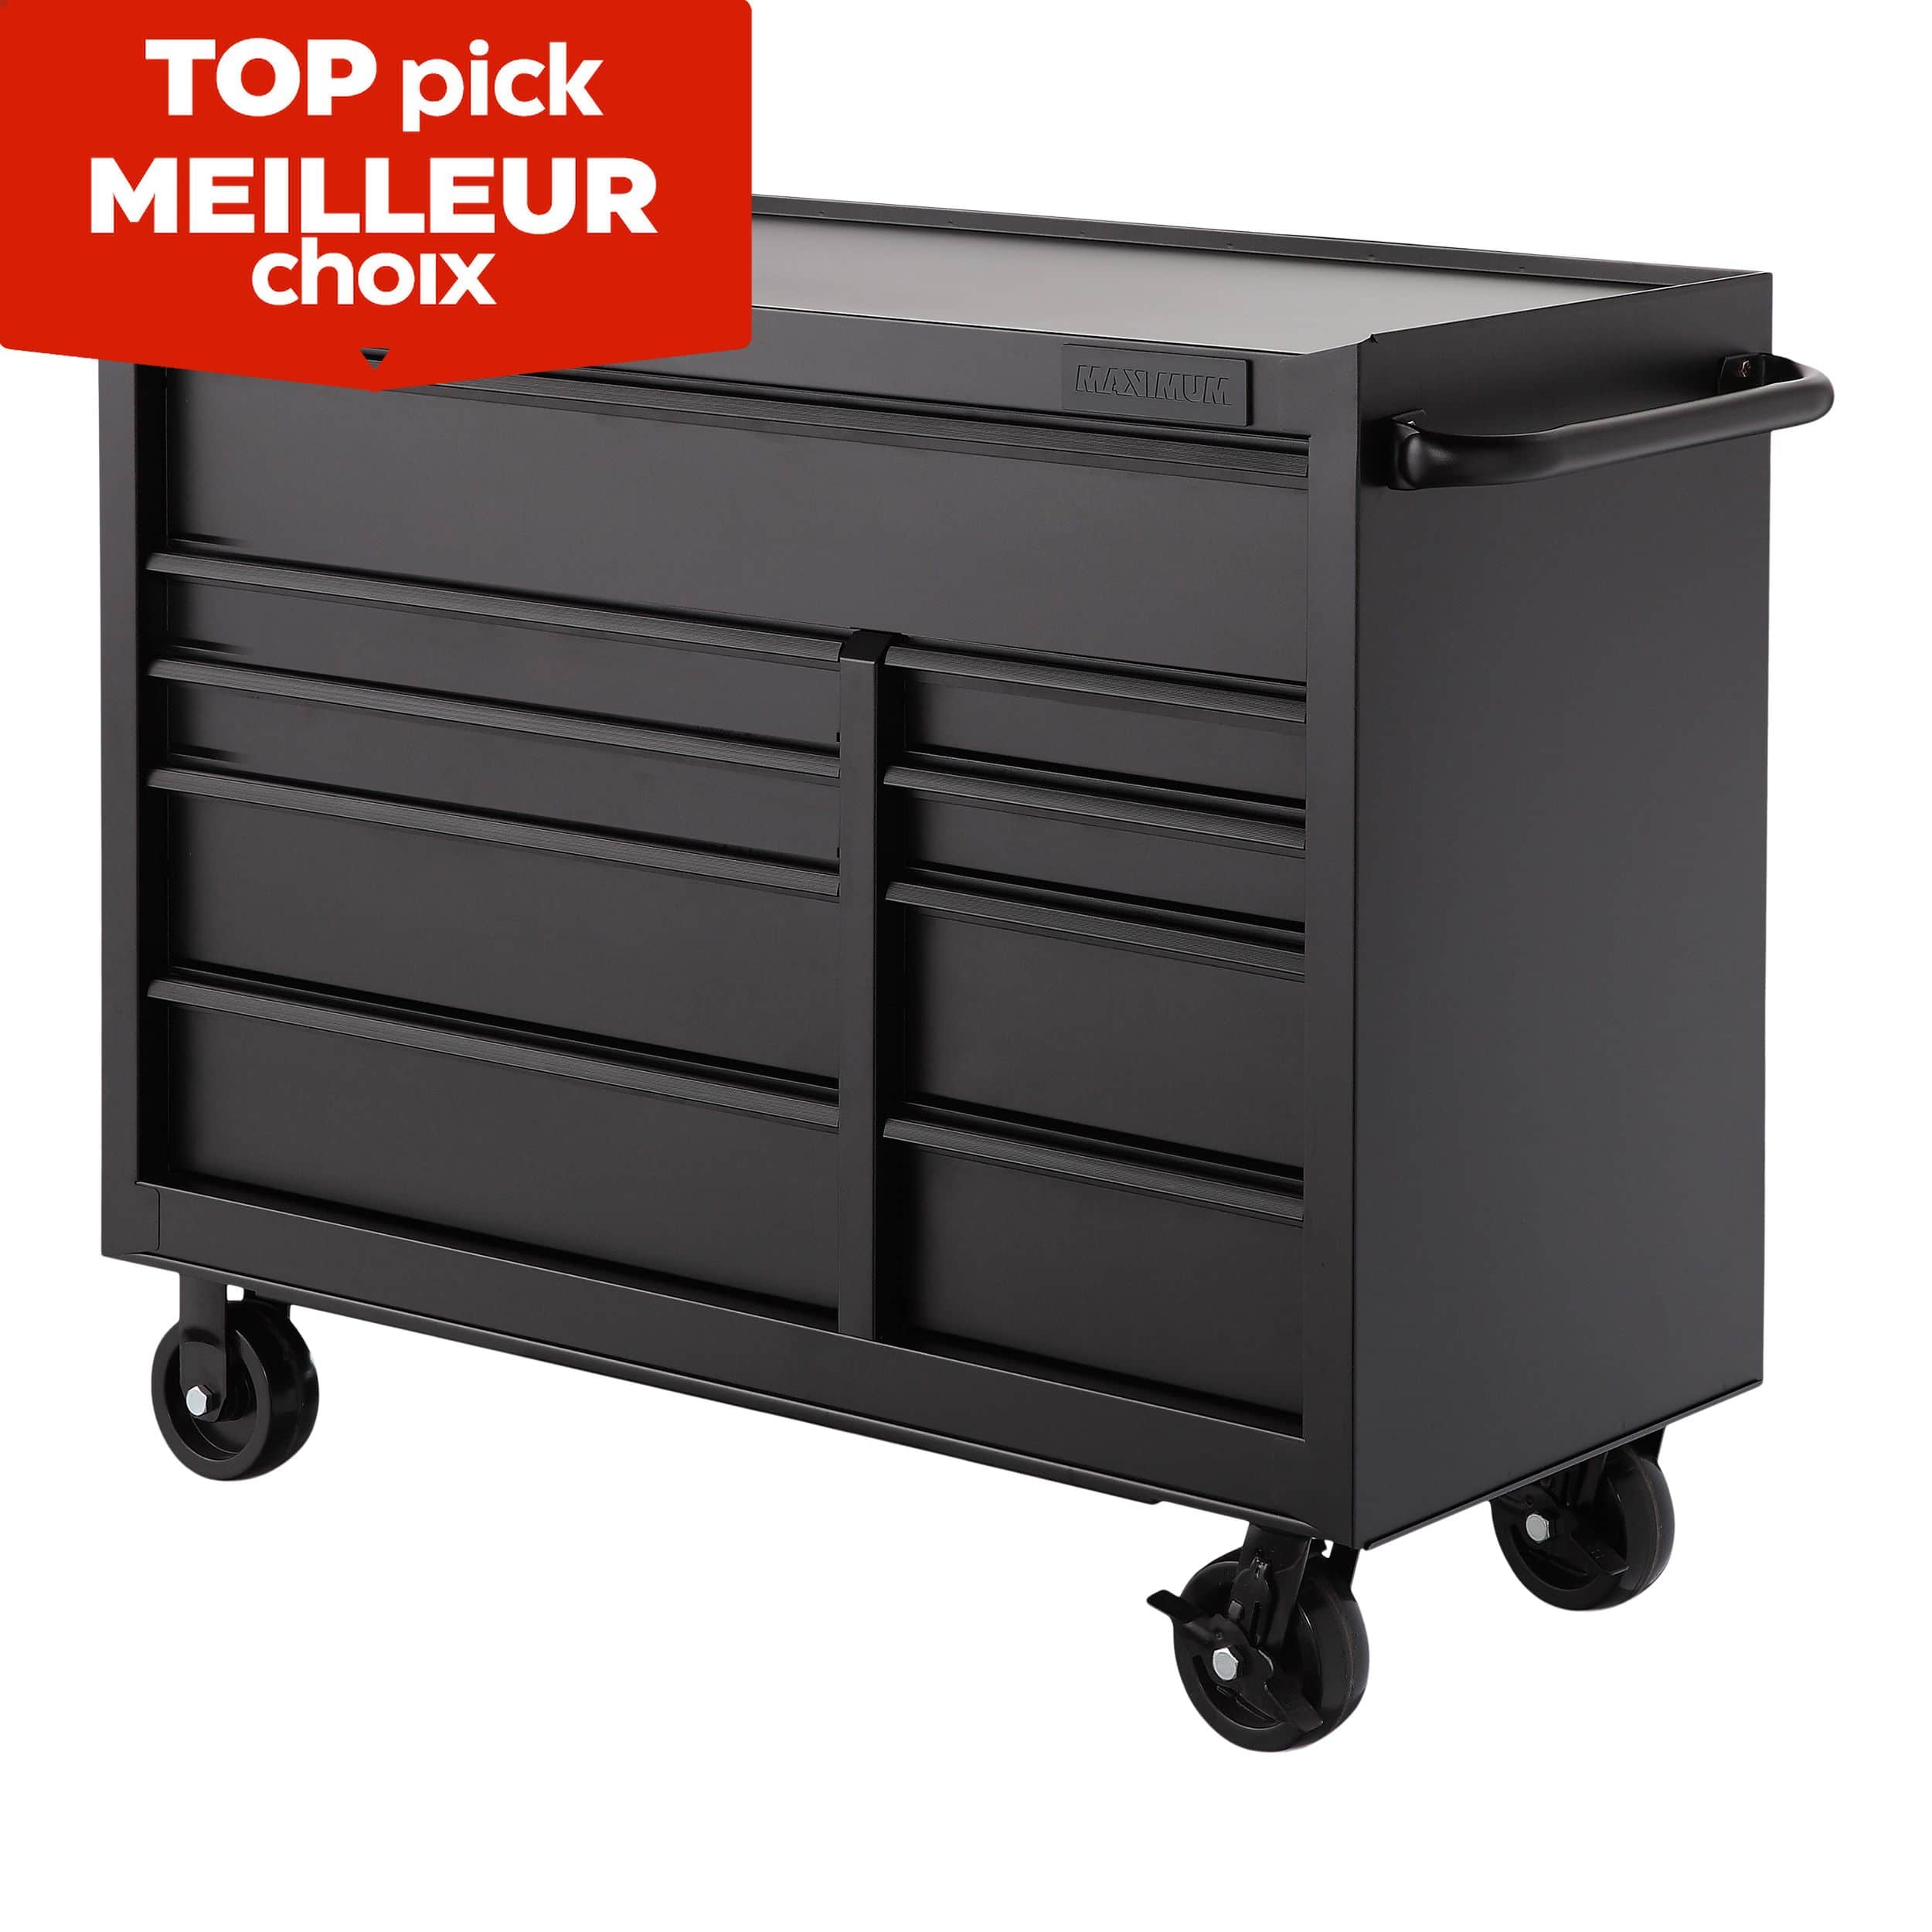 51.5 Inches Width 6 Drawers Dresser Large Capacity Clothing Storage Cabinet  Black